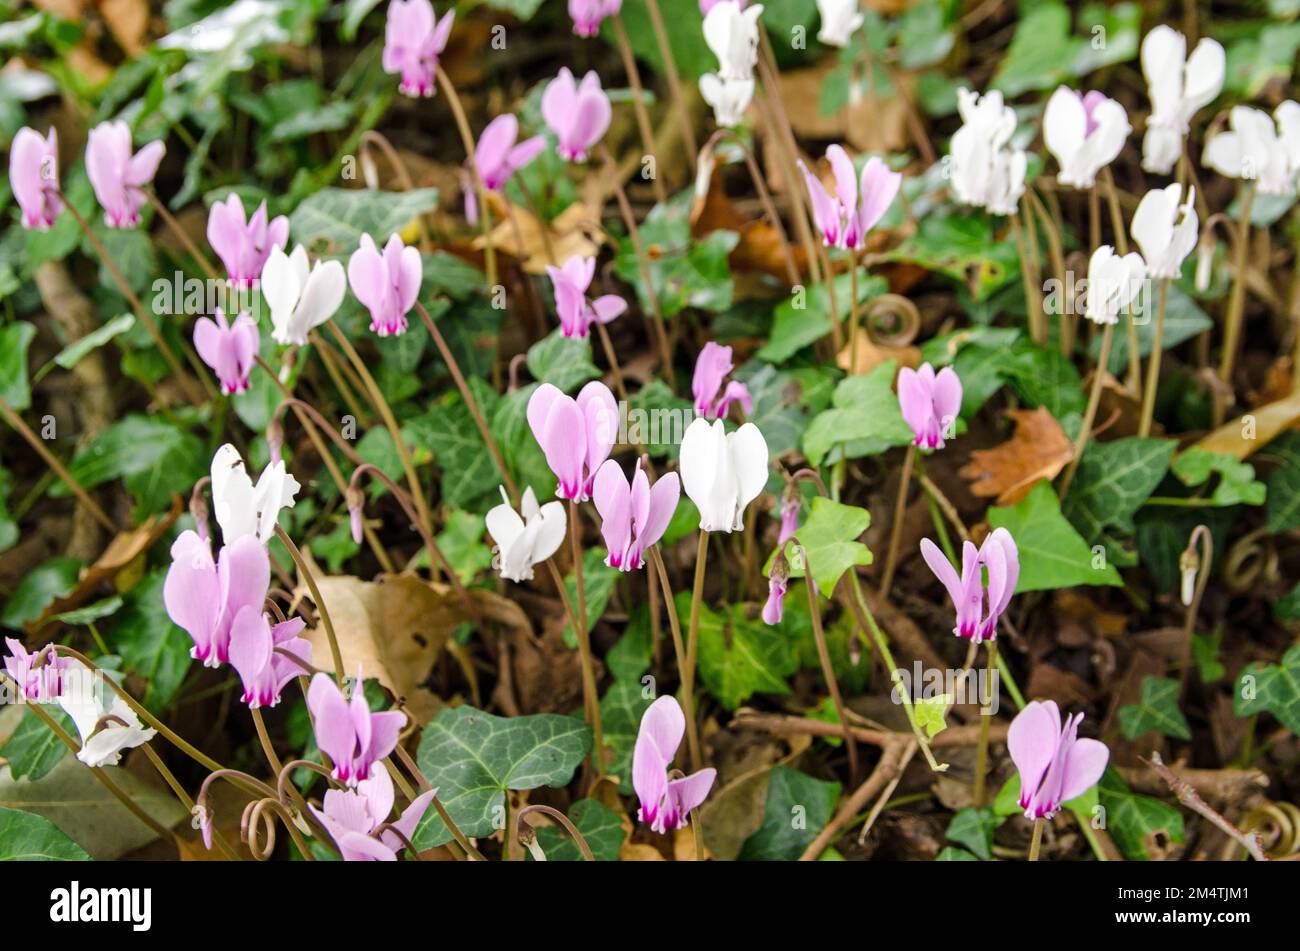 A carpet of pink and white cyclamen in flower across the floor of a Hampshire woodland in late summer. Stock Photo